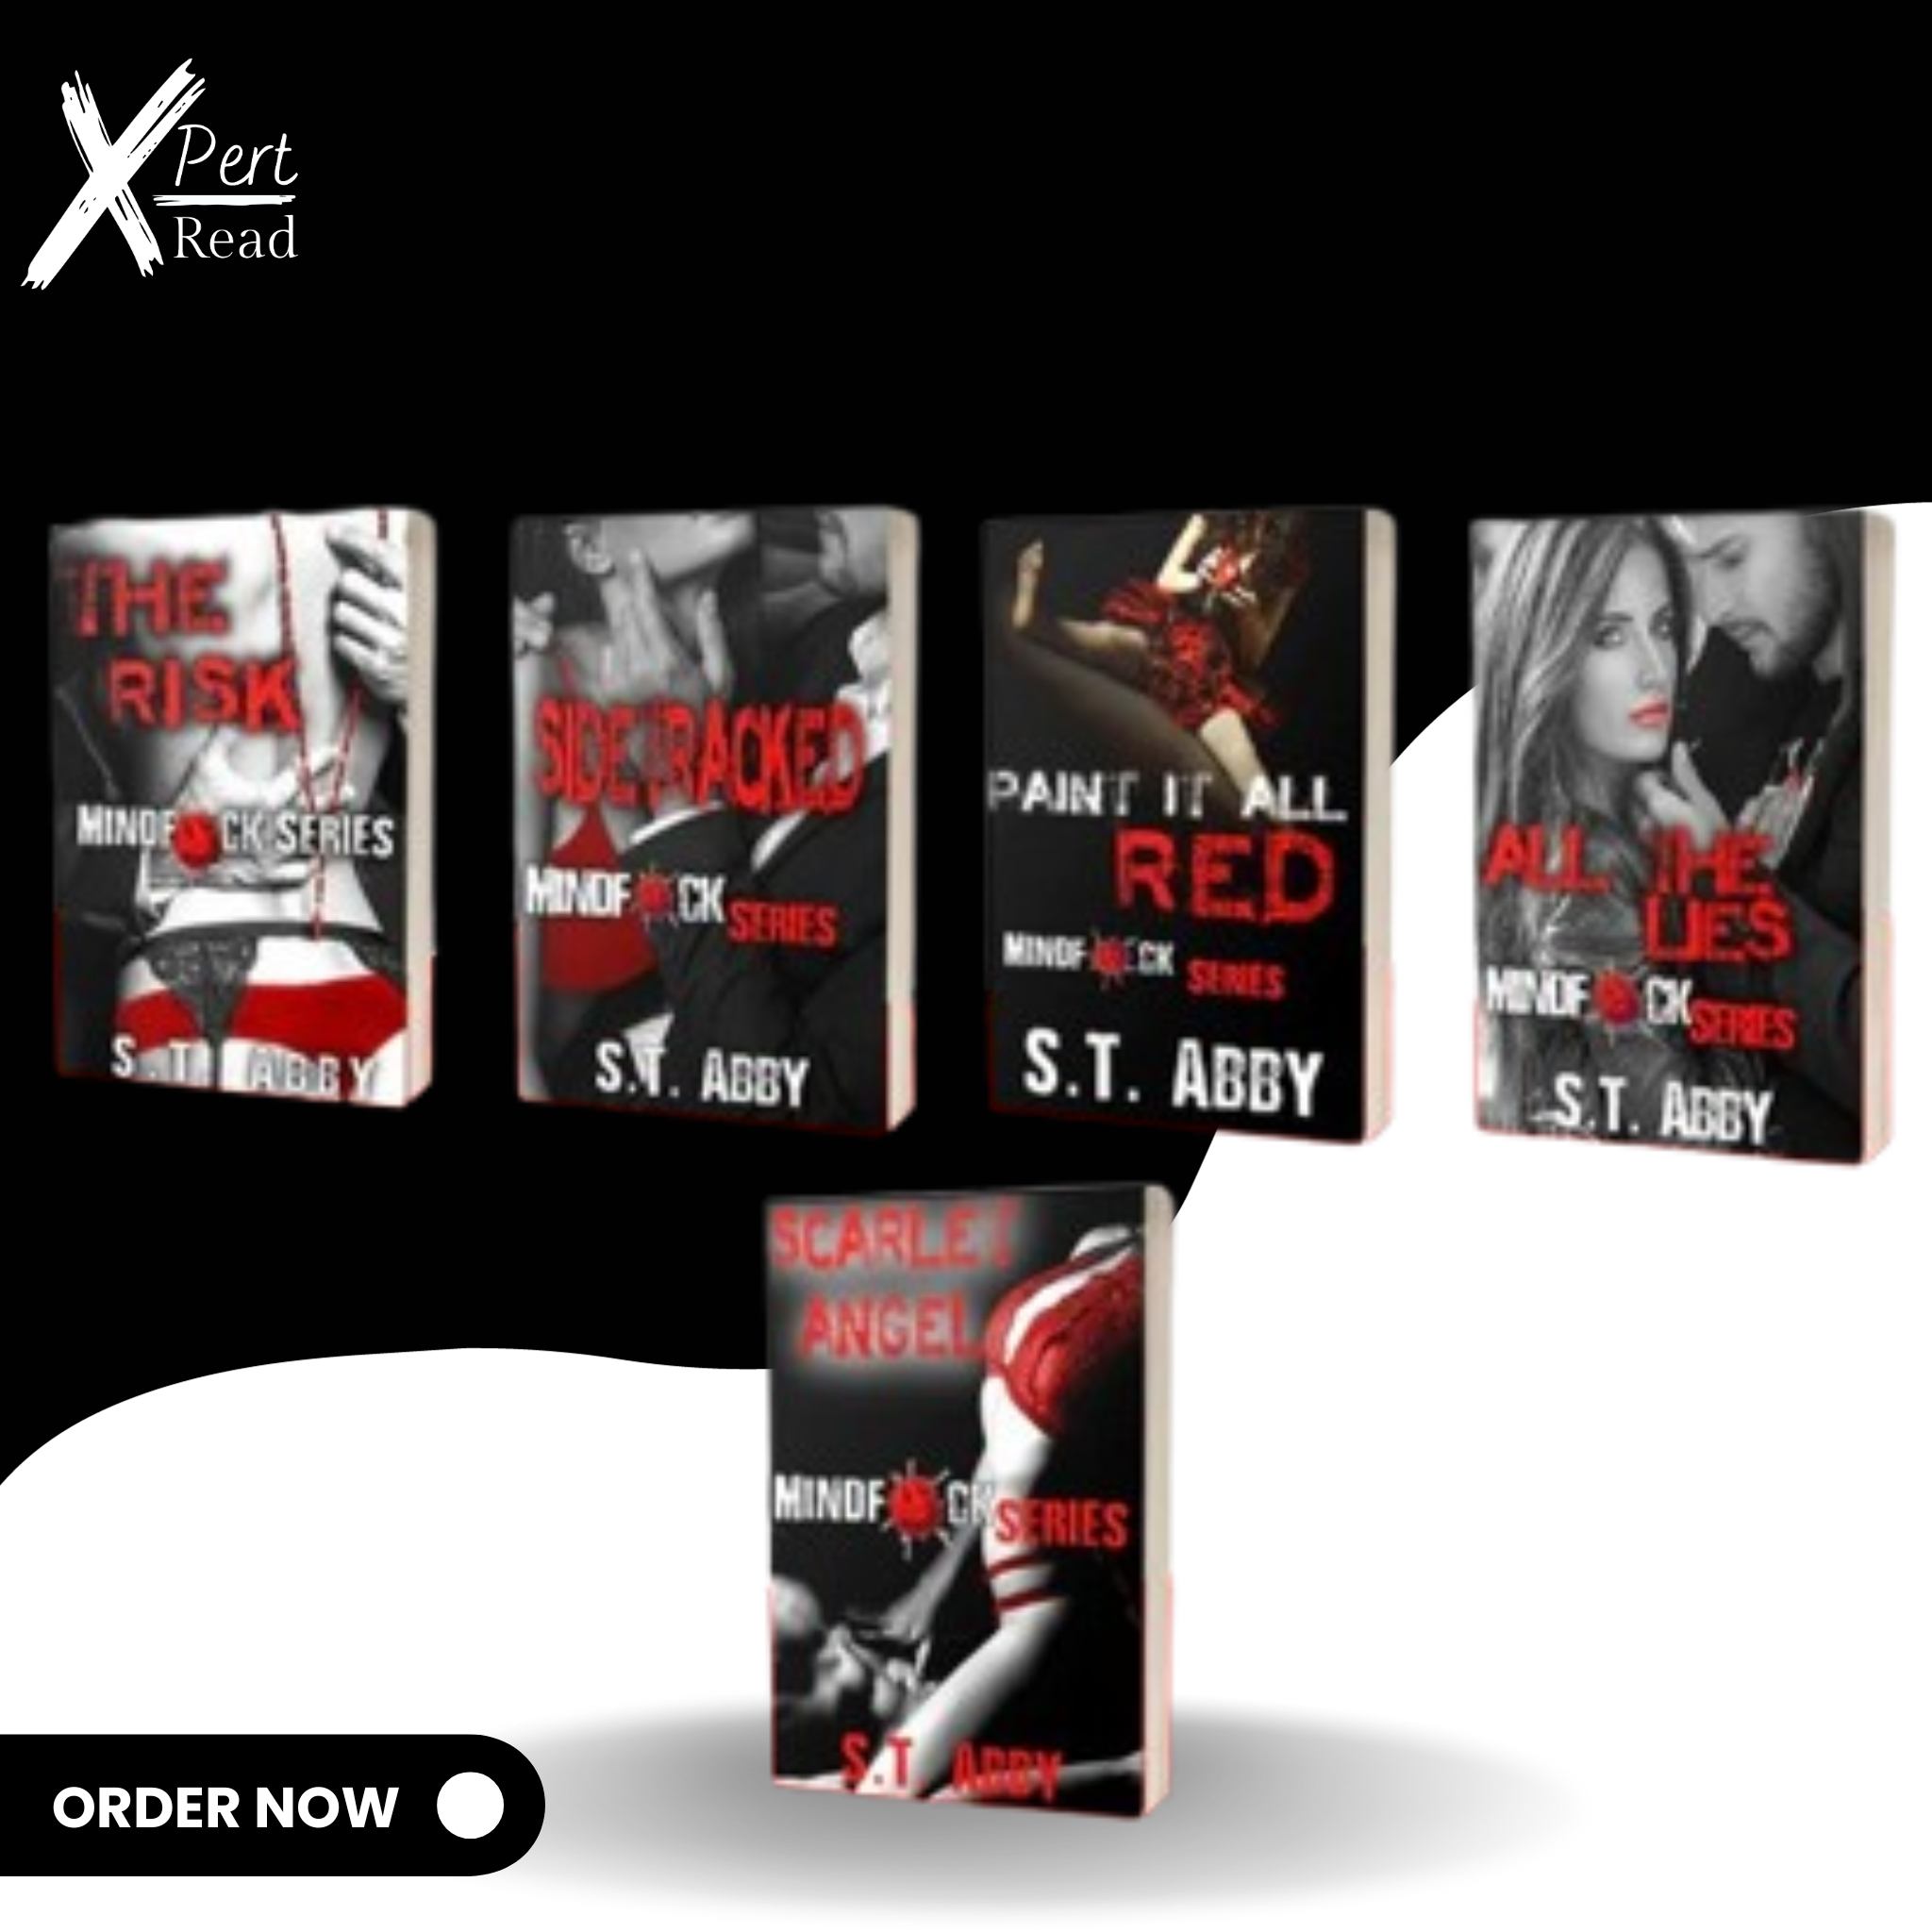 MindFuck Series (5 Books) By S.T. ABBY